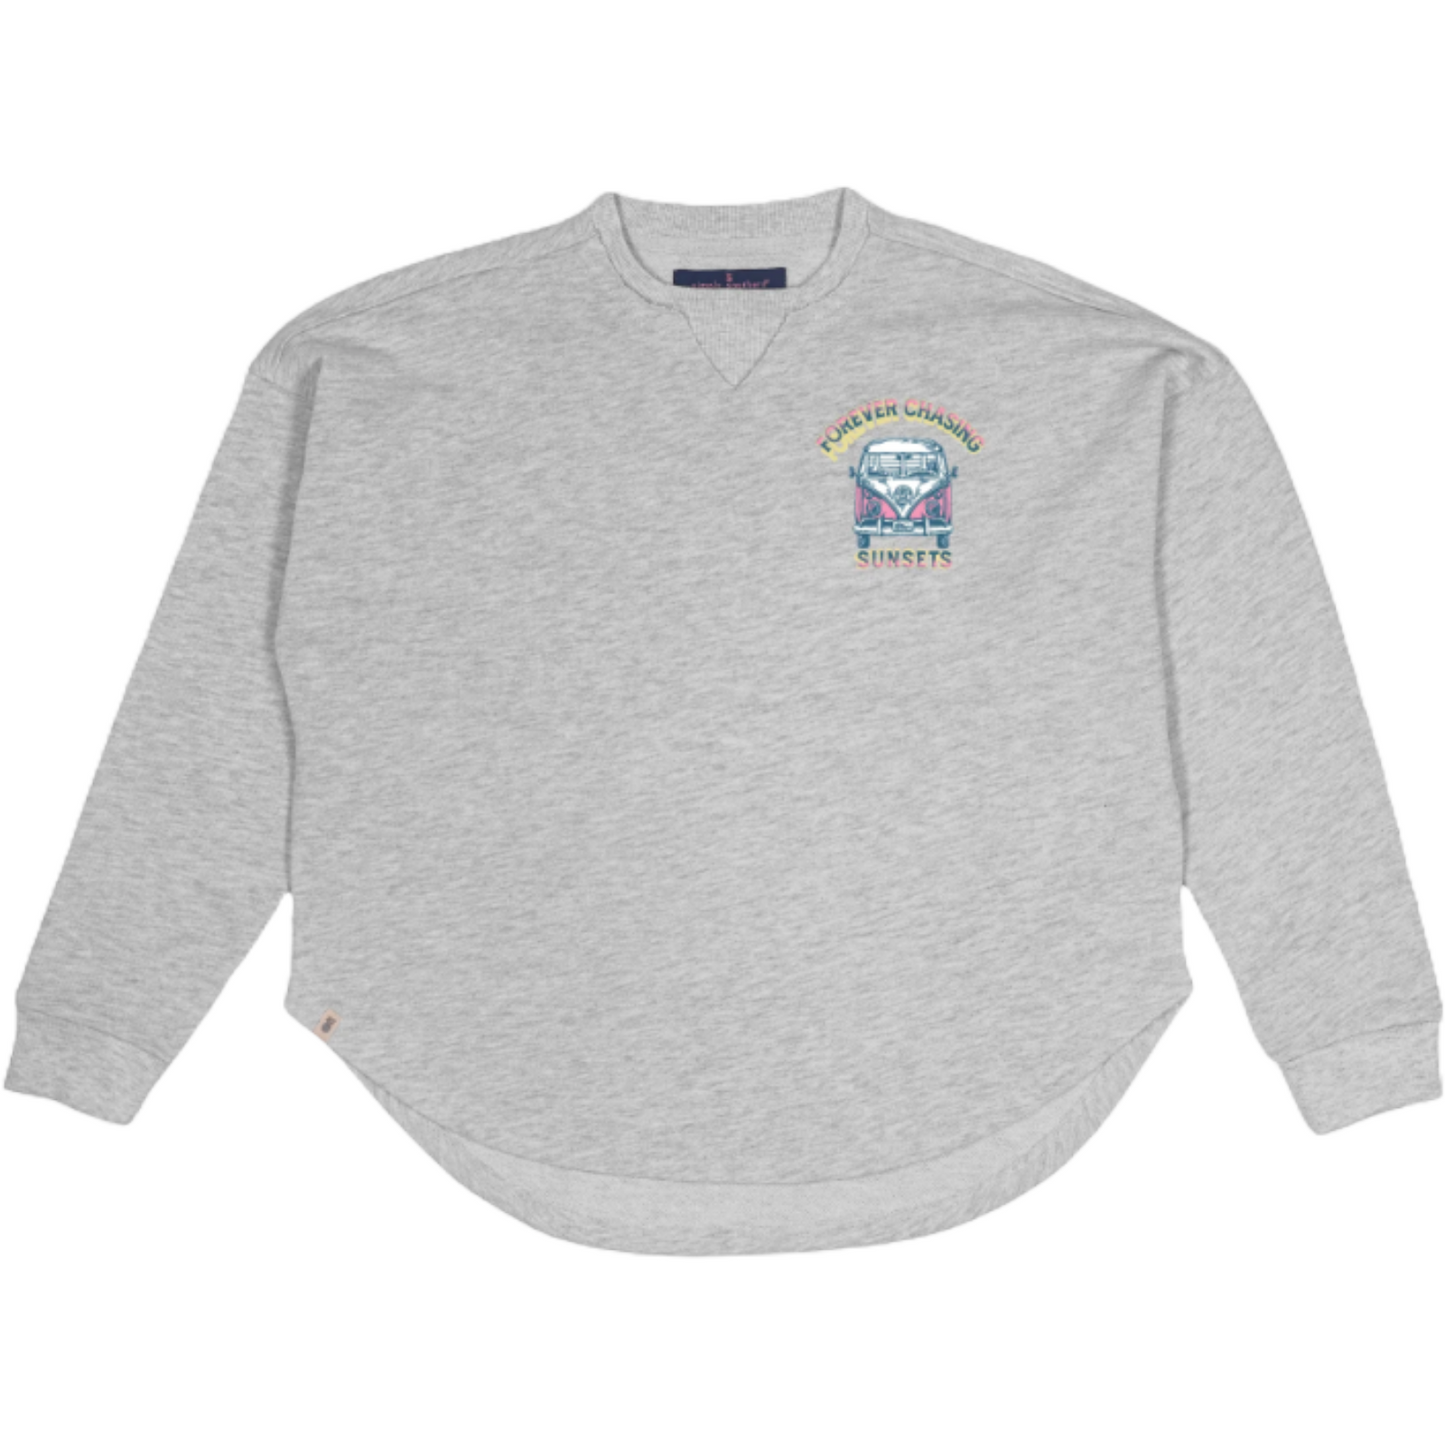 Simply Southern Ladies 'Forever Chasing Sunsets' Grey Pullover Sweatshirt FOREVER-STONE